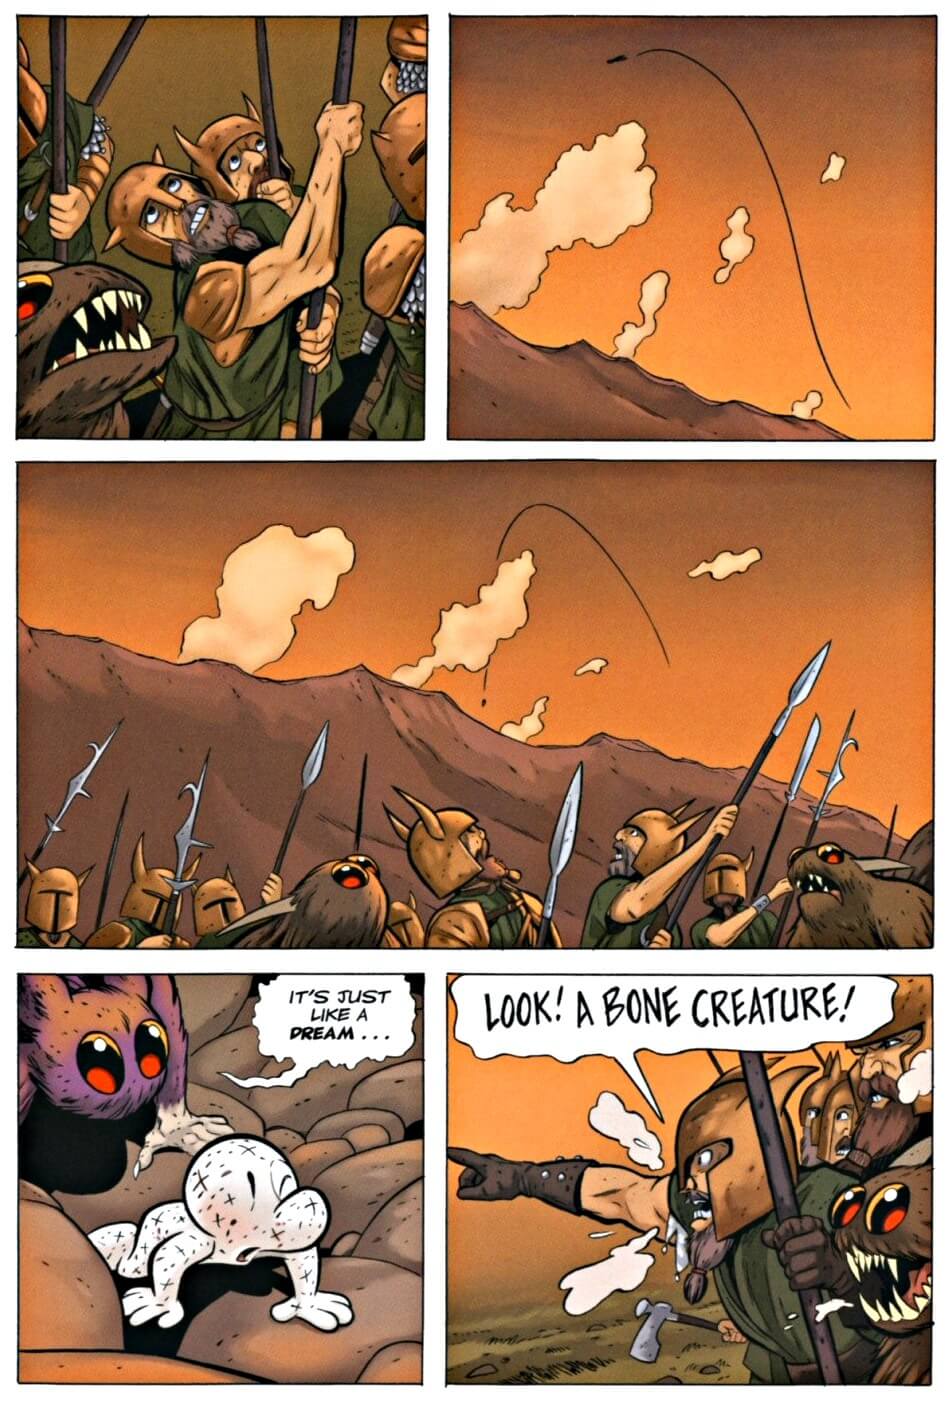 page 112 chapter 4 of bone 9 crown of horns graphic novel